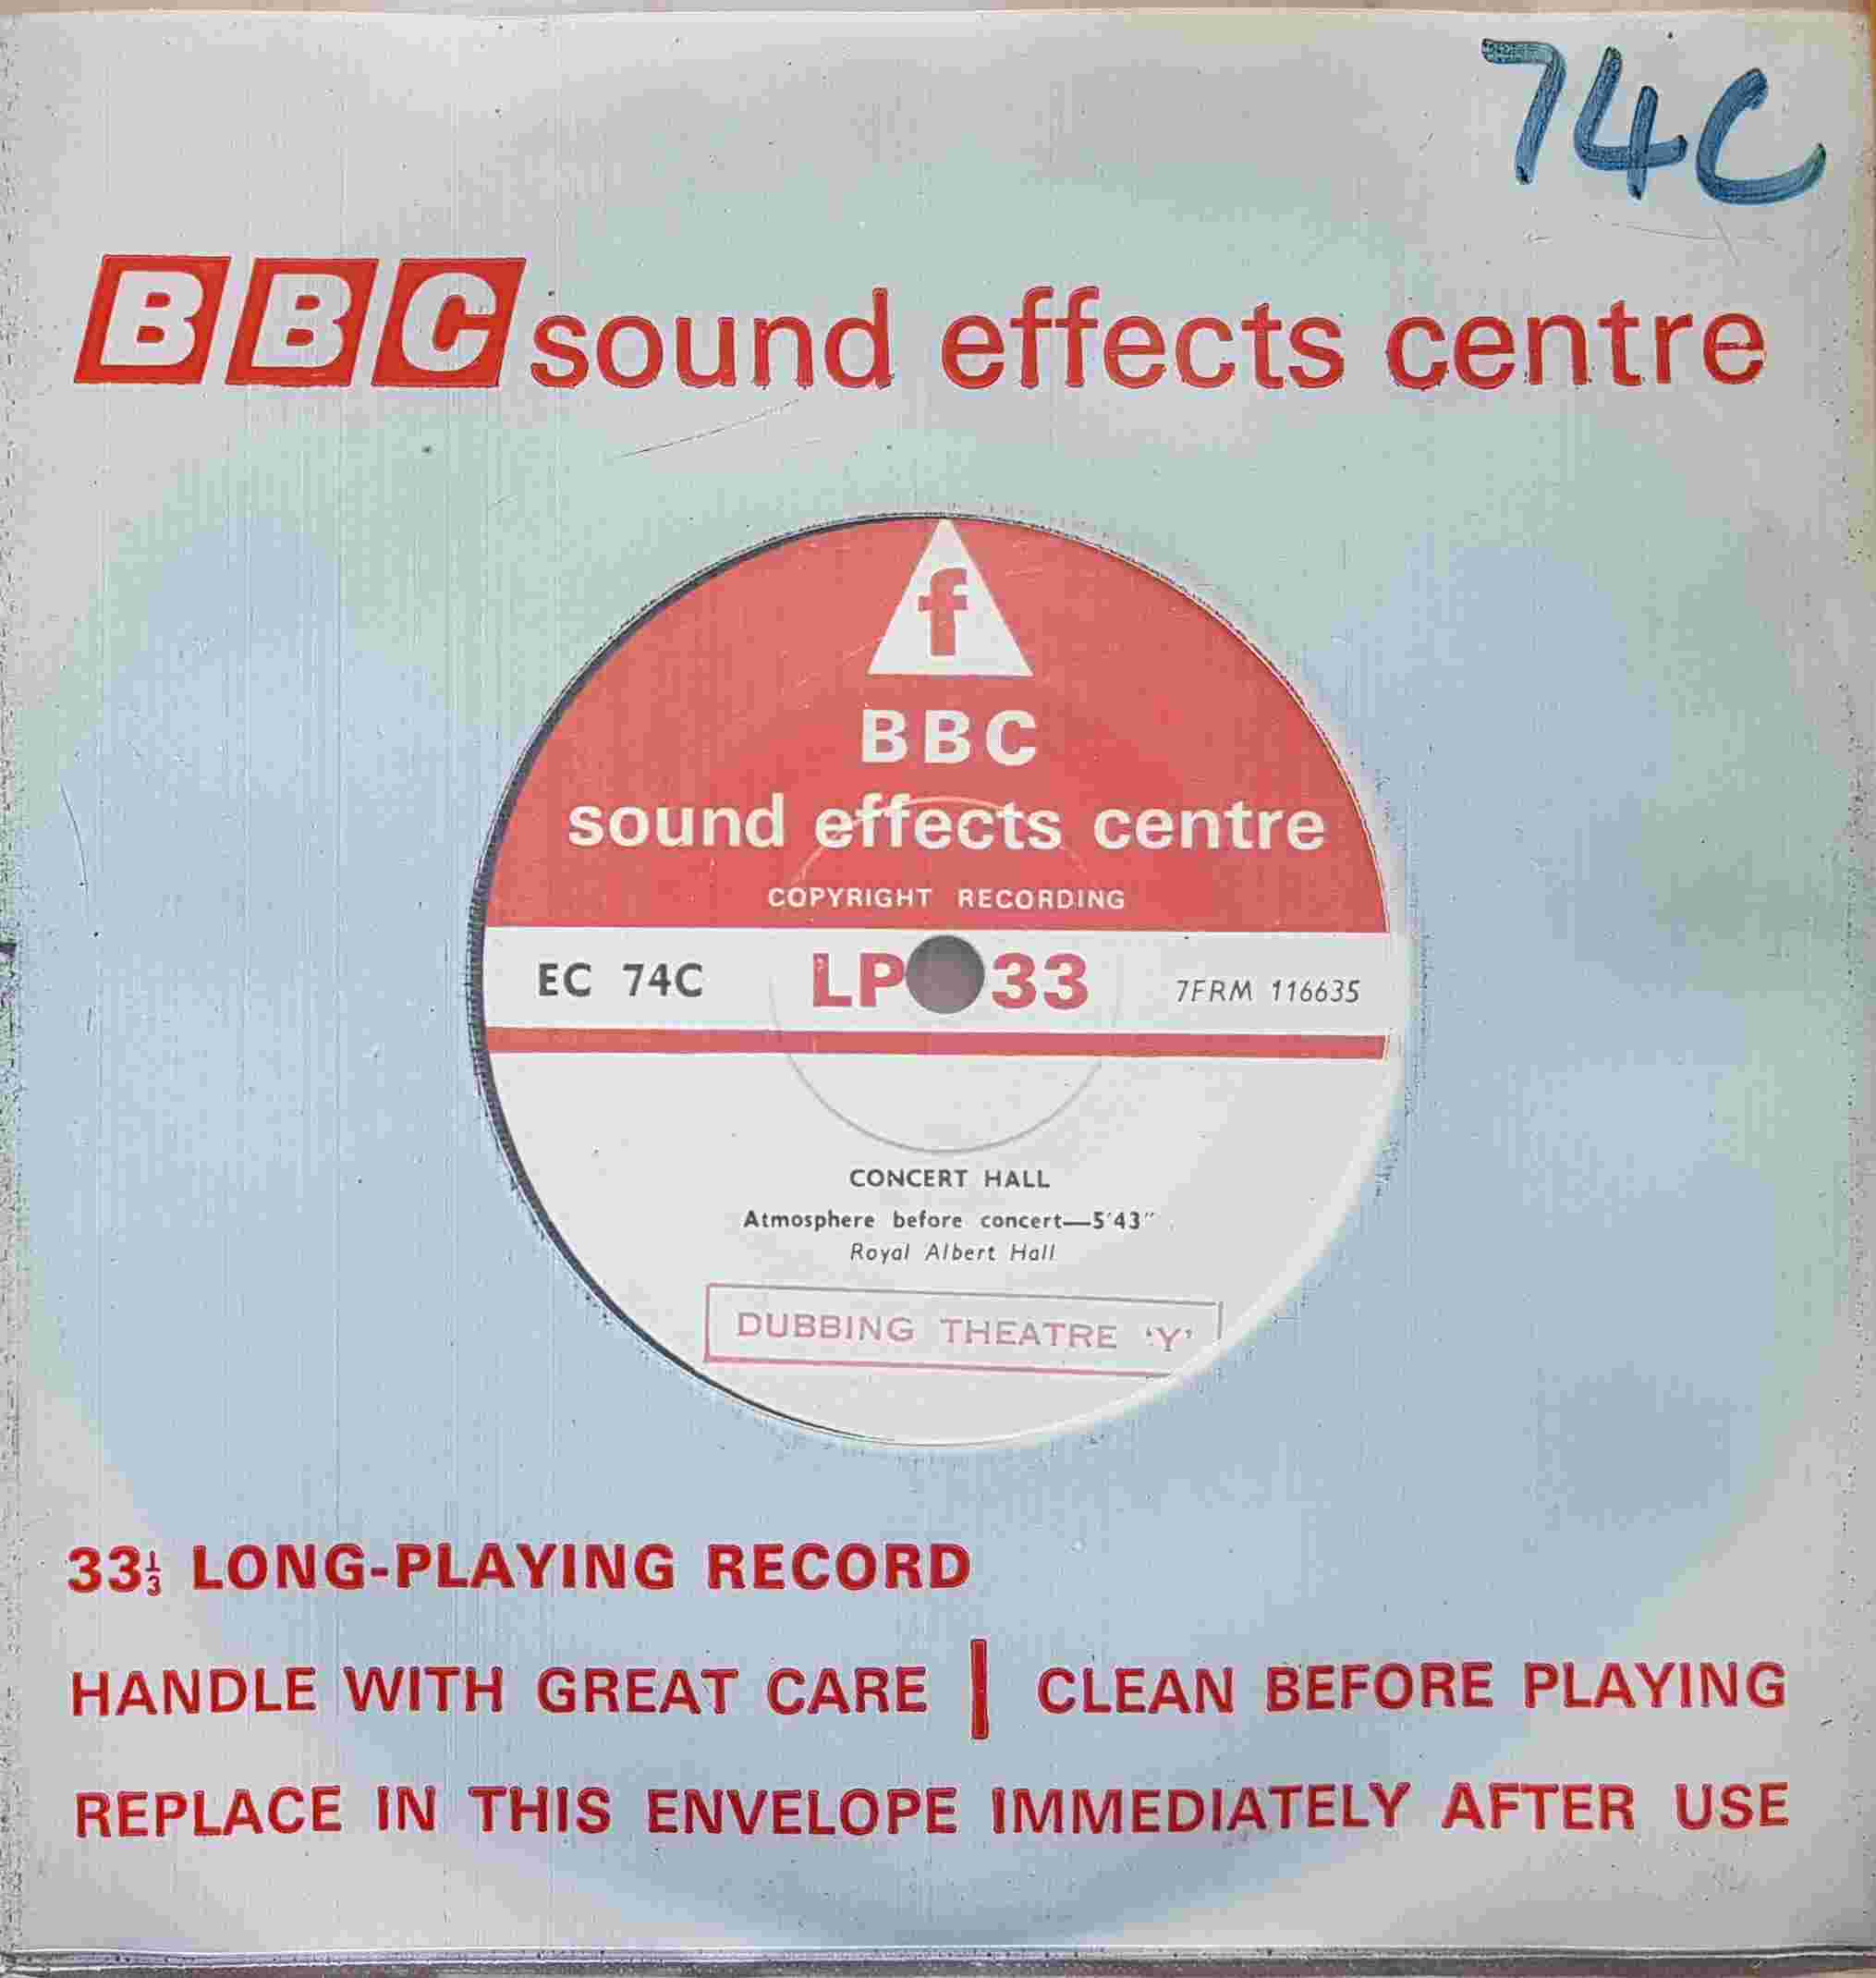 Picture of EC 74C Concert hall - Royal Albert Hall by artist Not registered from the BBC singles - Records and Tapes library